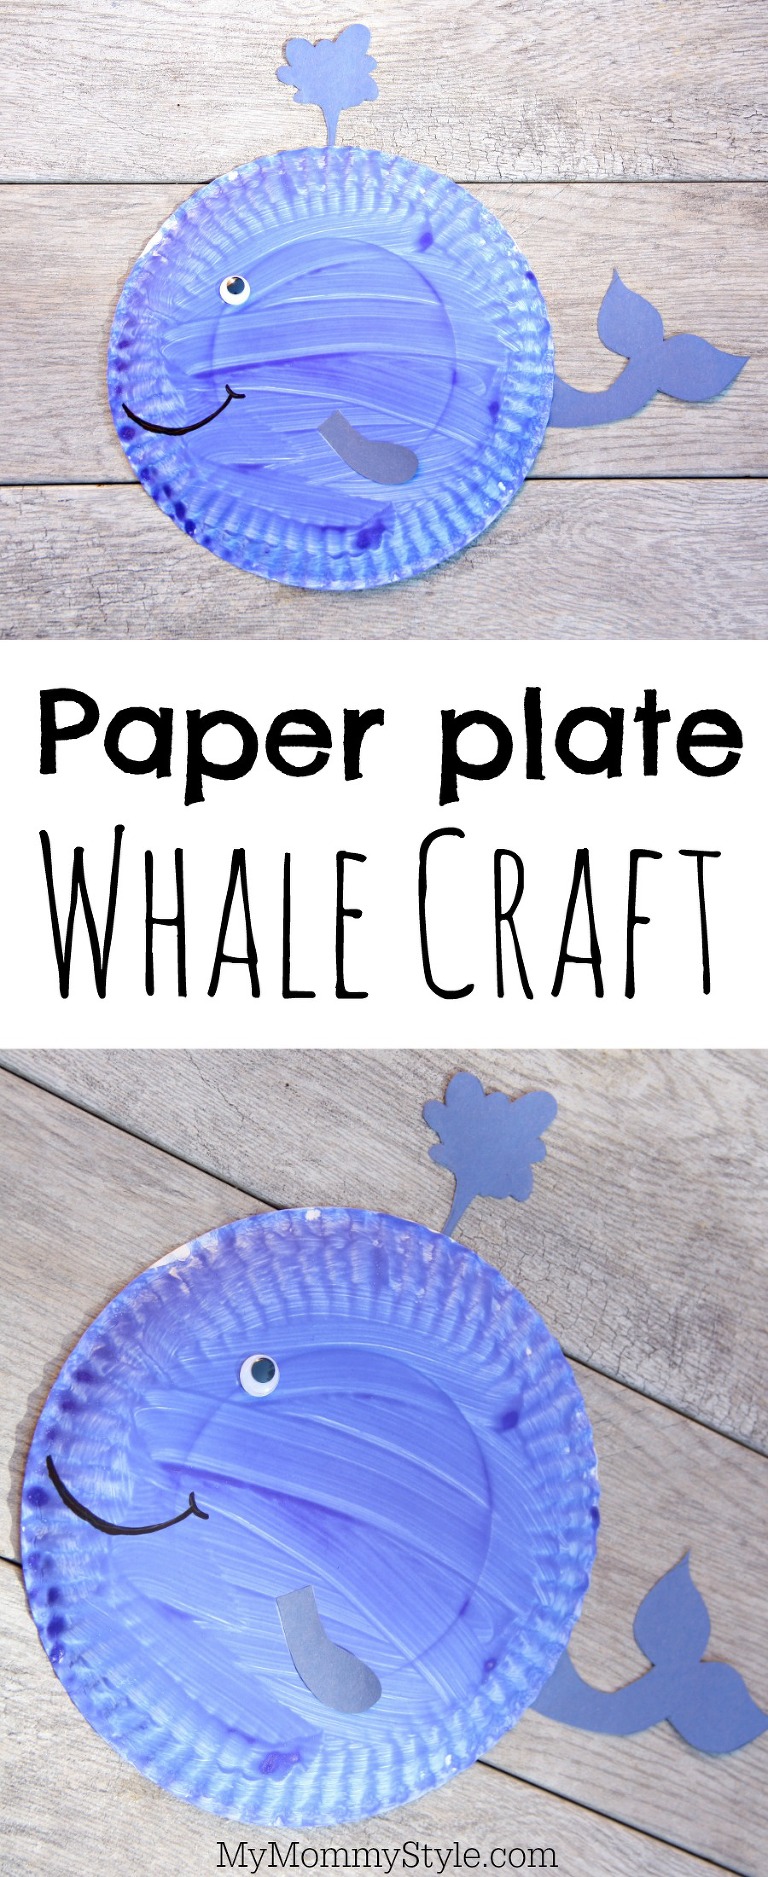 Paper plate craft for preschoolers, this whale is made from a painted paper plate. Paper plate whale craft is fun for a rainy day activity or an under the sea preschool activity.